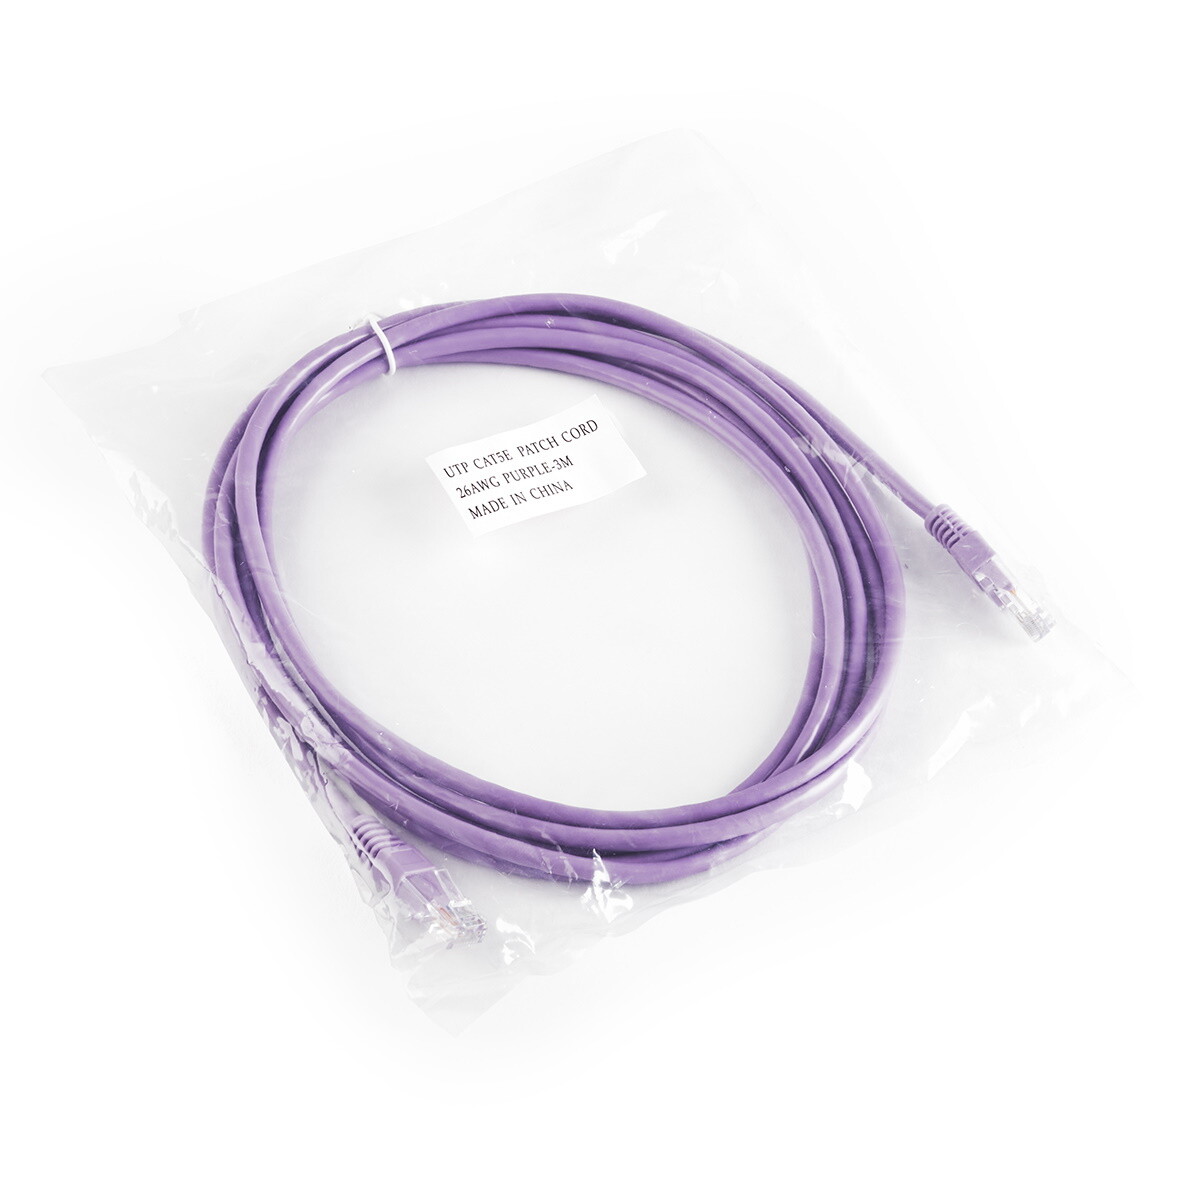 Dojo ONE Ethernet cable